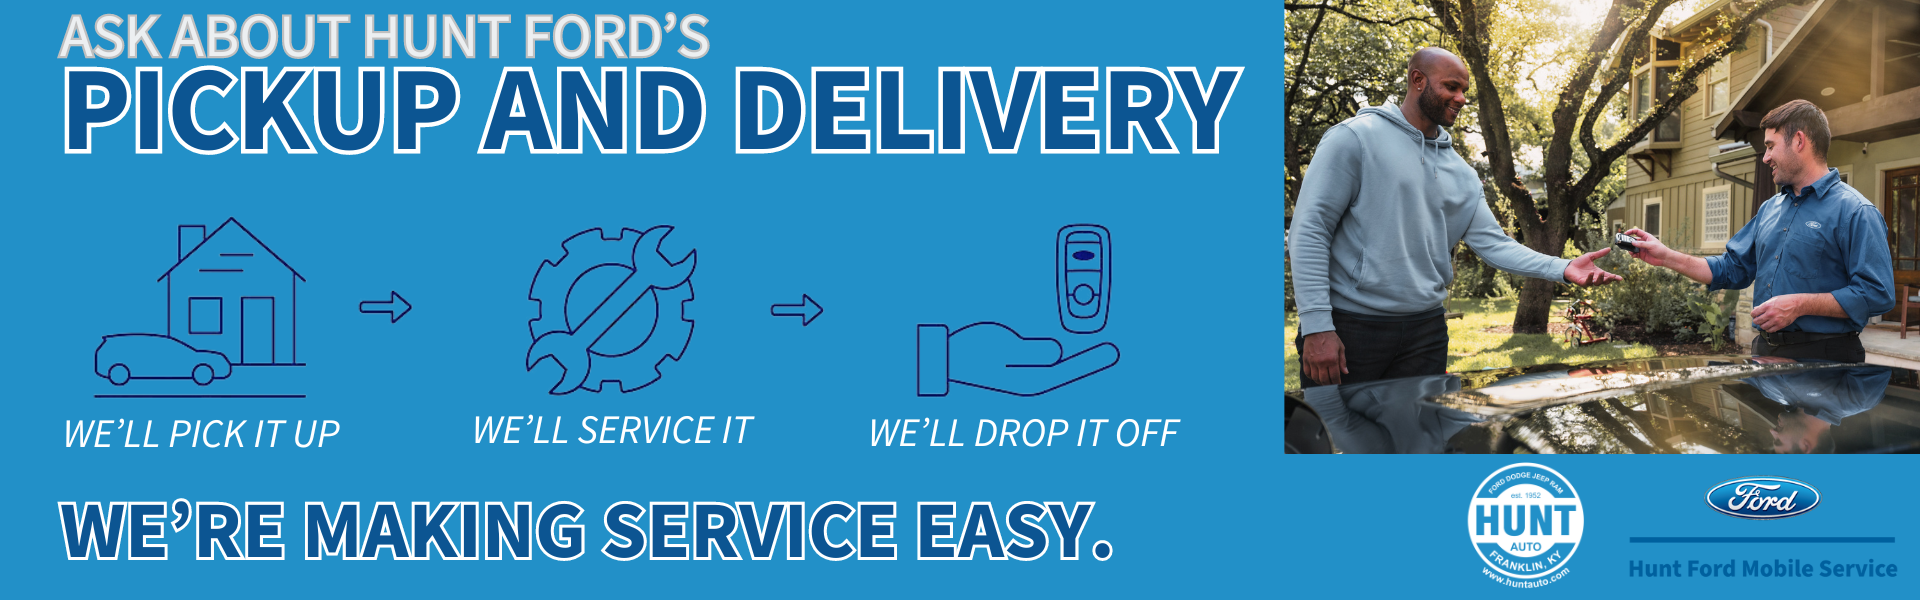 We're Making Service Easier with Pickup and Delivery